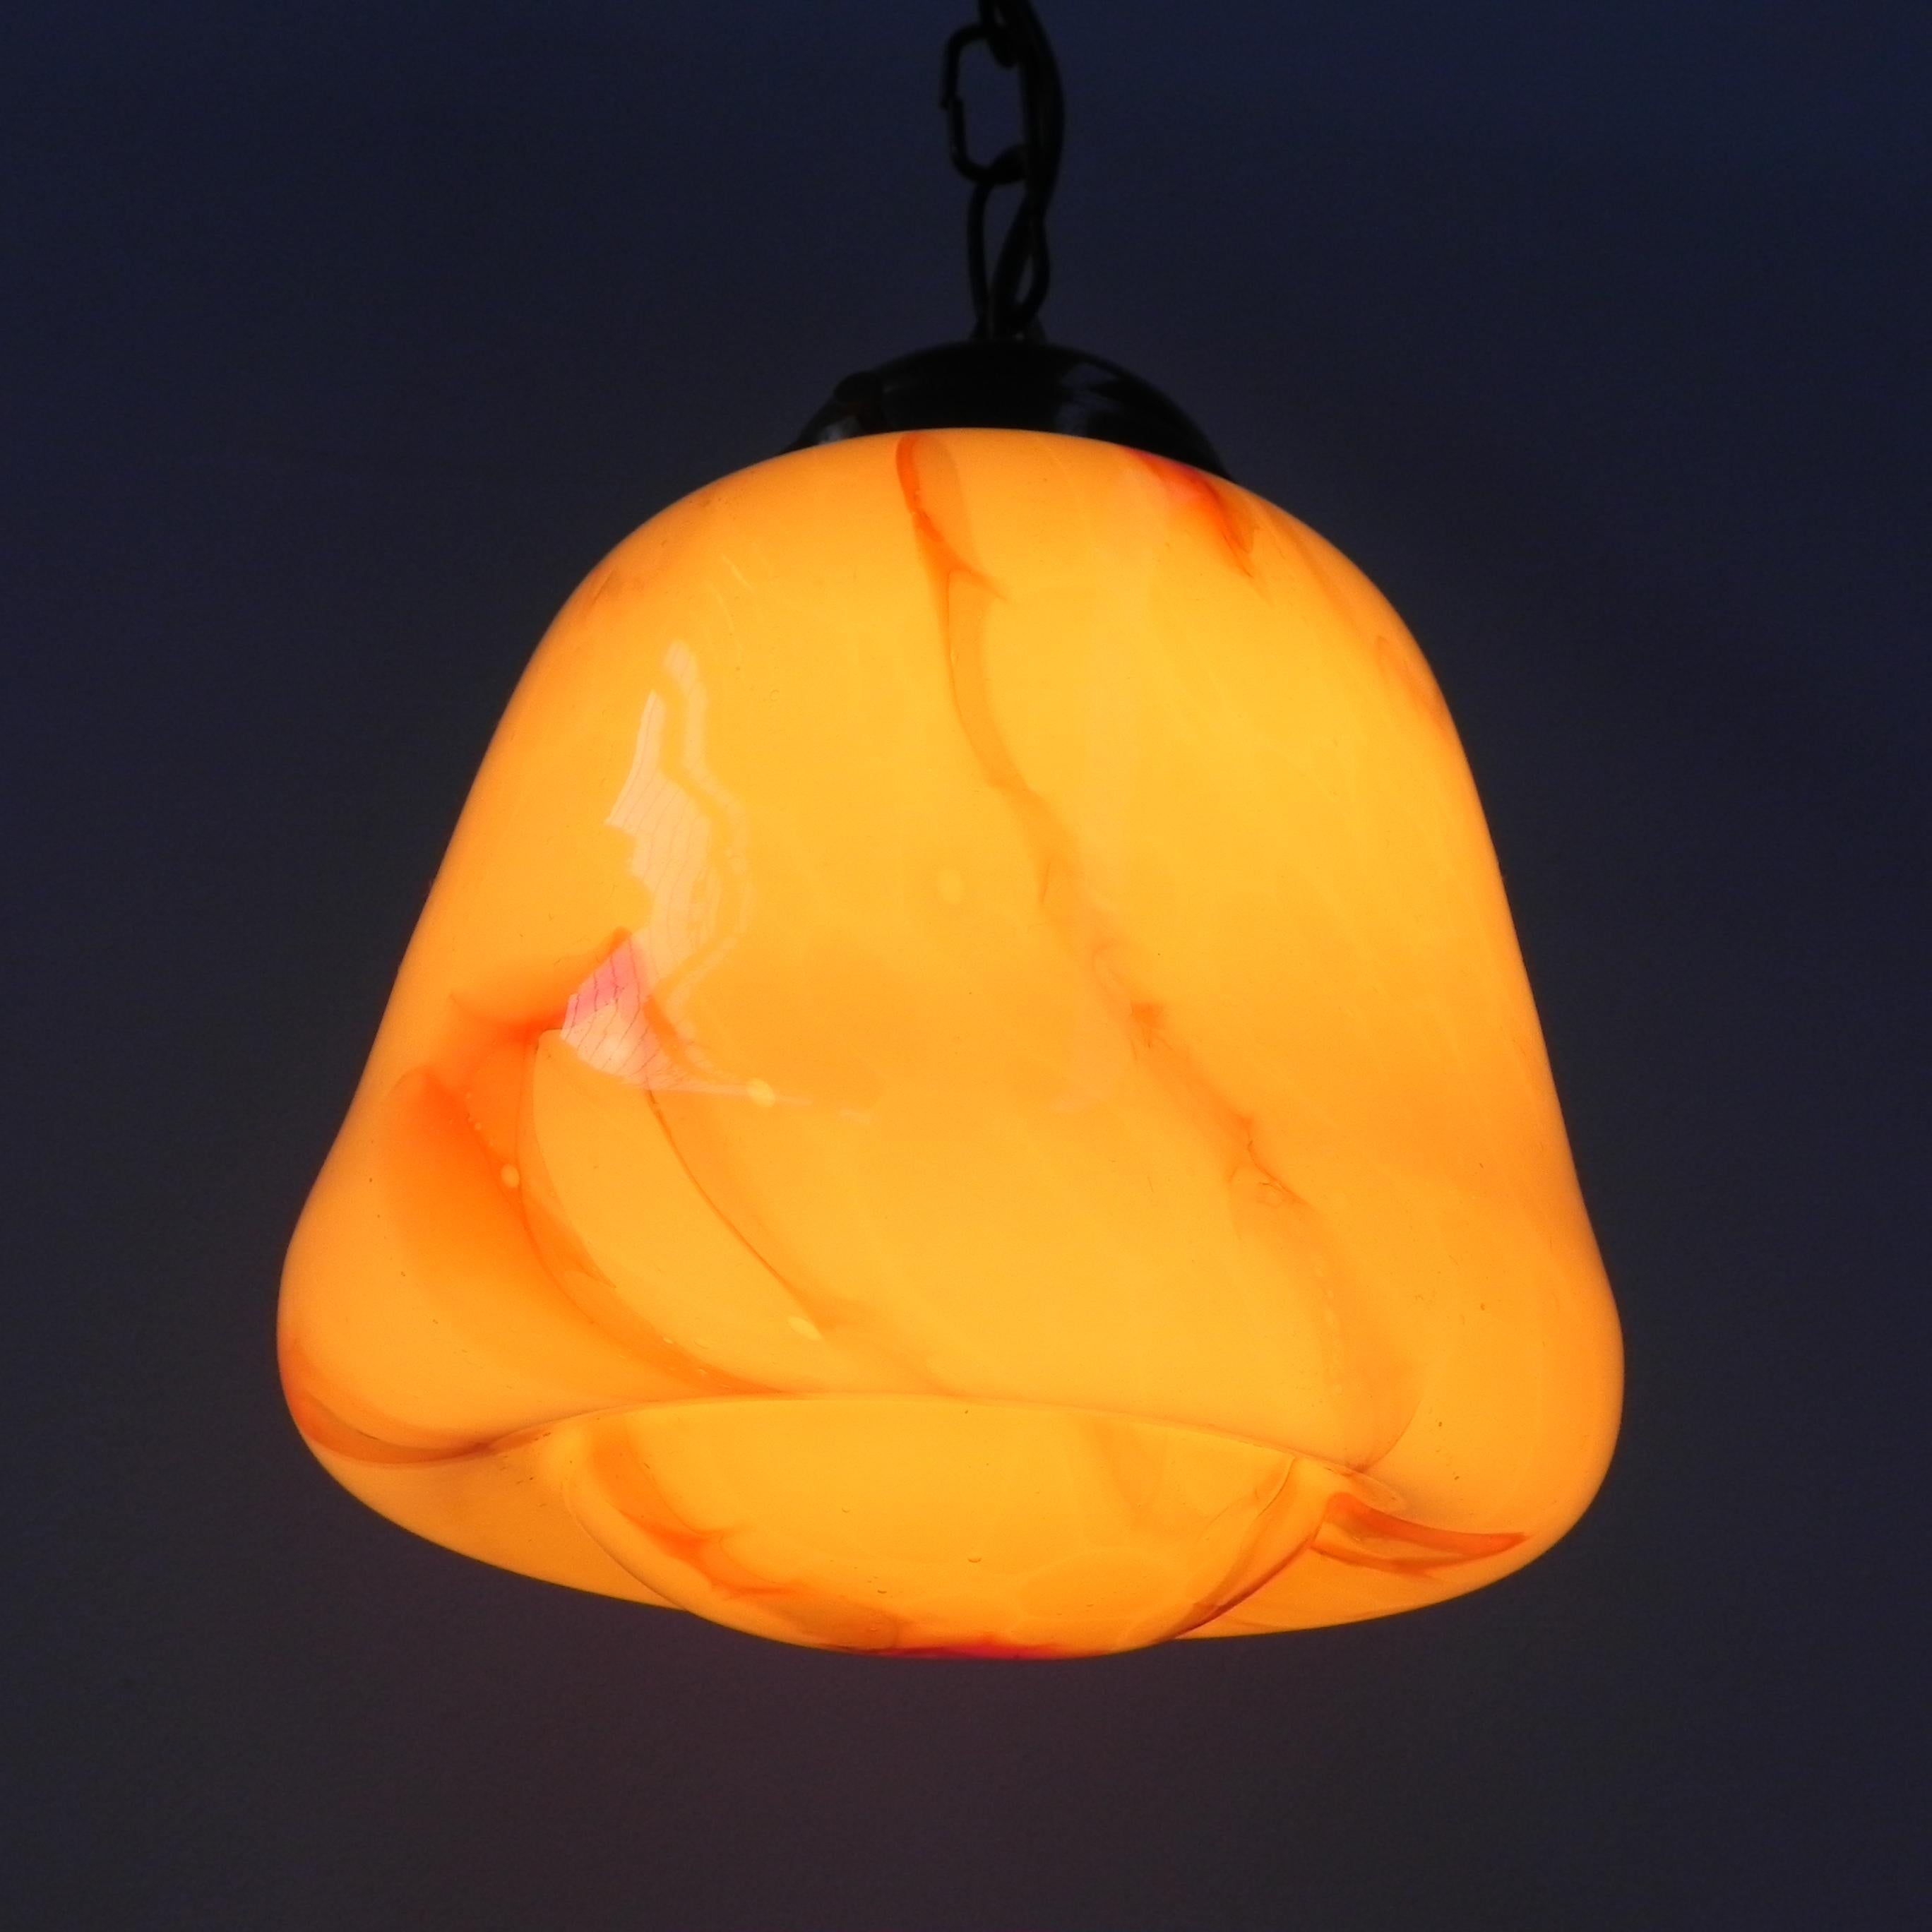 Art Deco hanging lamp with marbled glass shade For Sale 8